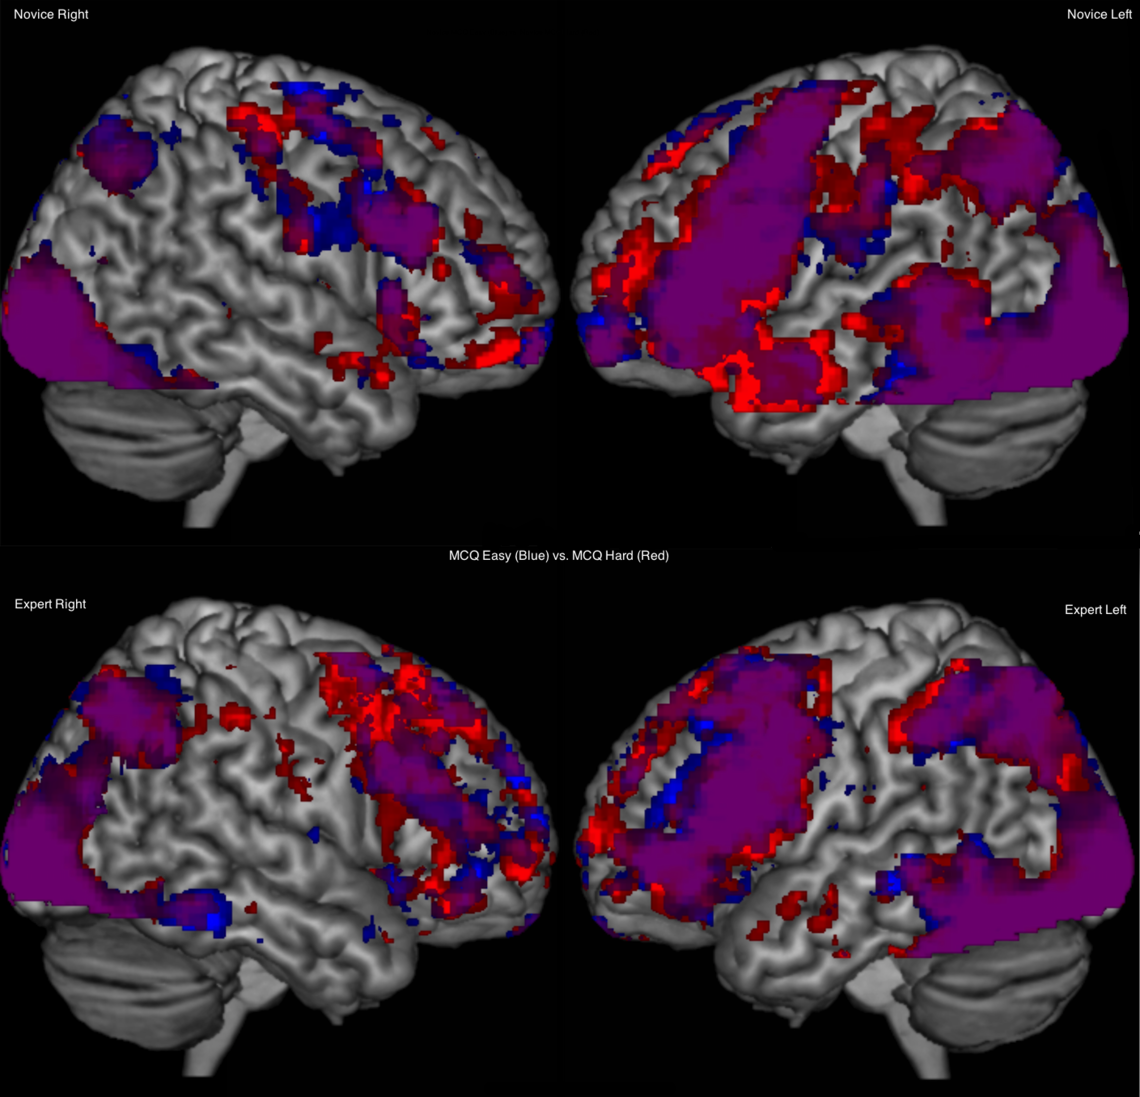 Scans show the difference in right and left hemisphere activation in novice and expert brains during clinical decision-making. Top left and right, the novice brain processing easy cases (blue), hard cases (red) and common areas of activation on easy and hard (purple). Bottom left and right show the expert brain processing the same cases. 